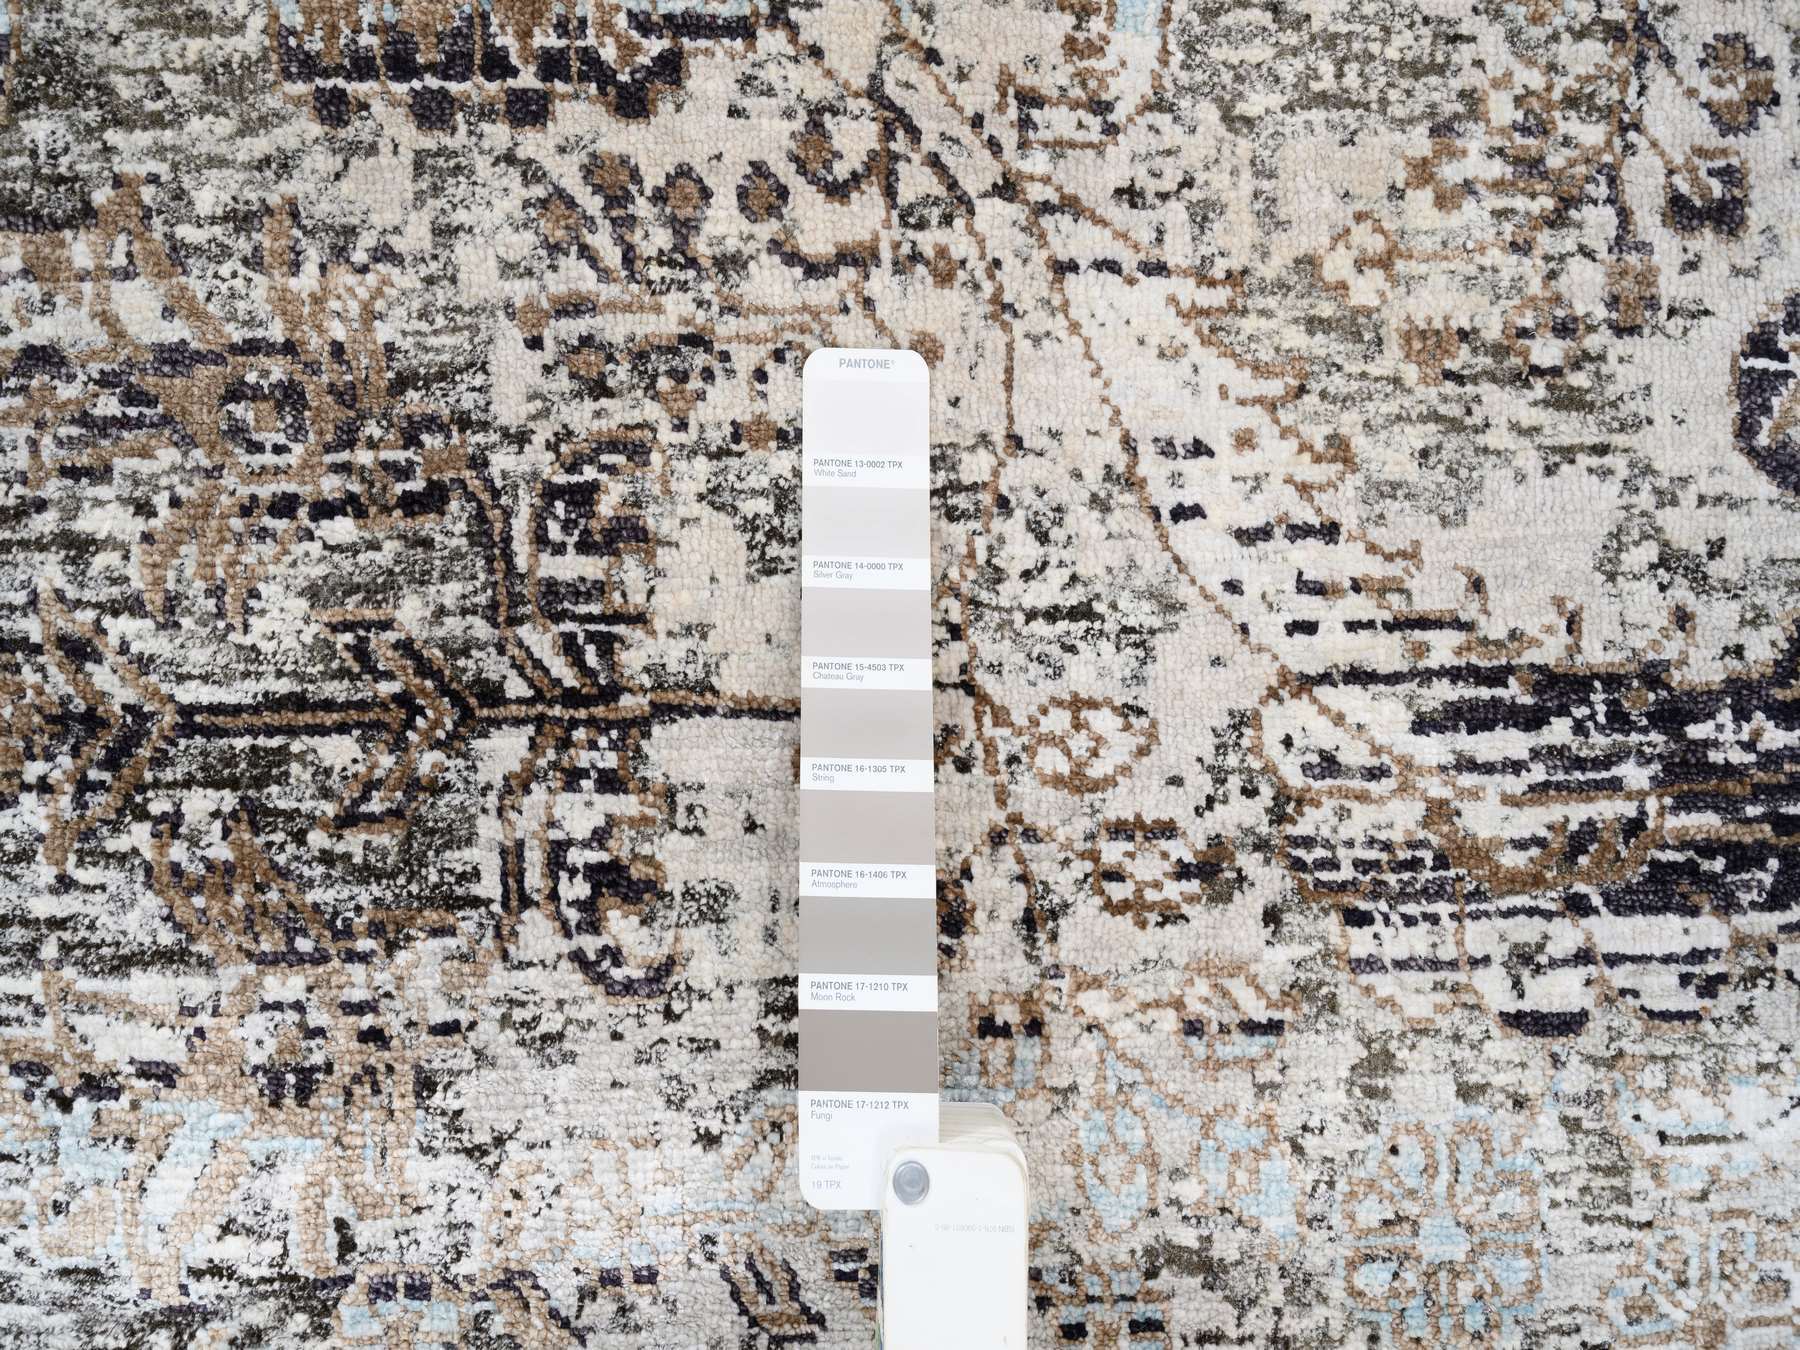 TransitionalRugs ORC573156